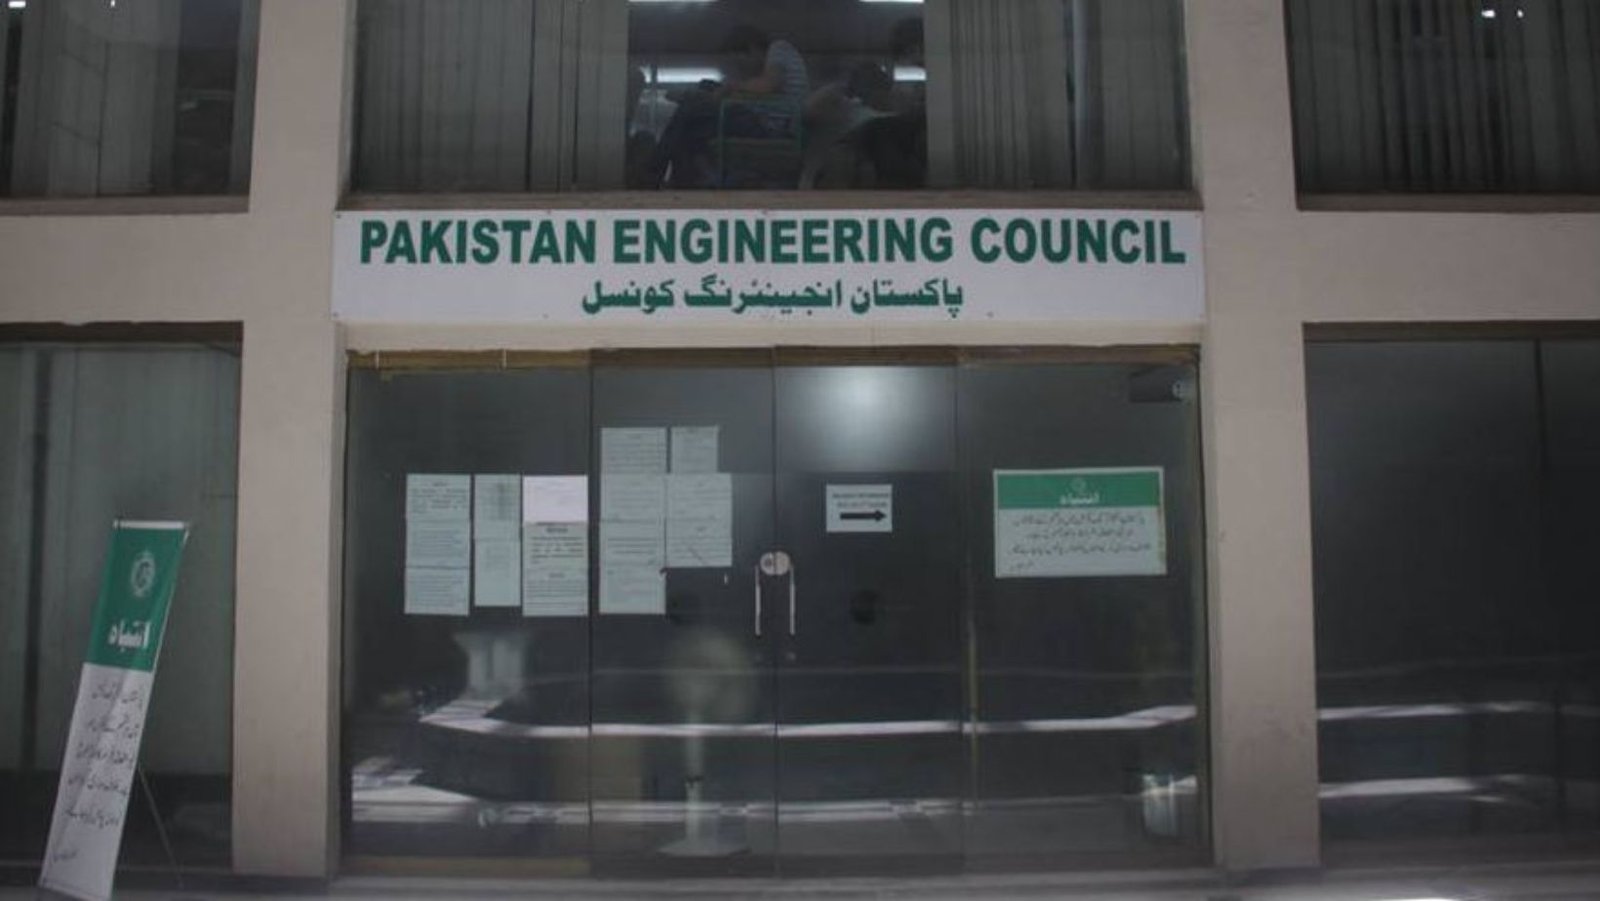 The PEC will hold a dialogue on ending engineer unemployment